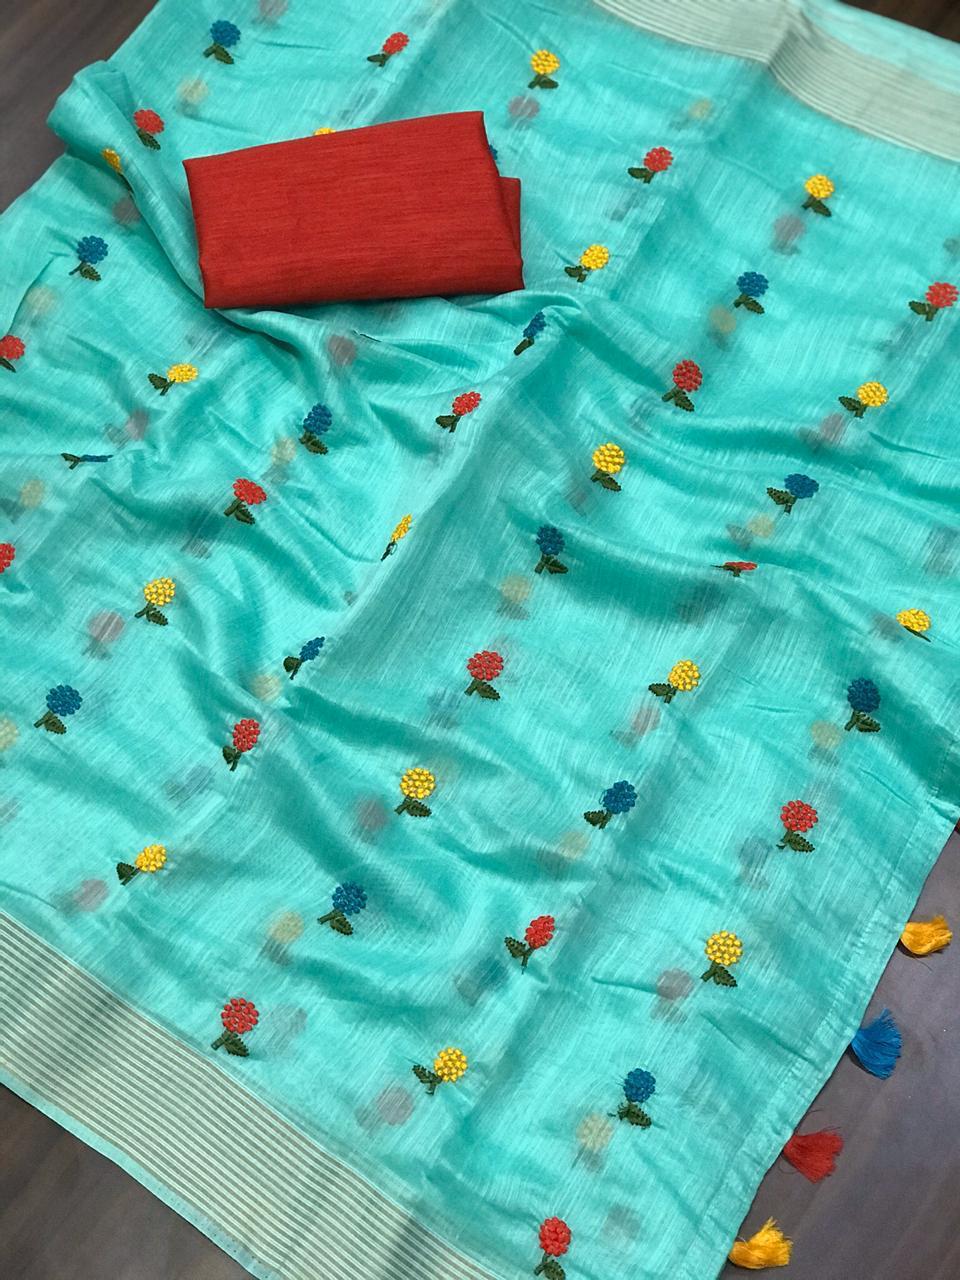 Non Catalog Linen Cotton With Embroidery Work Sarees At Whol...